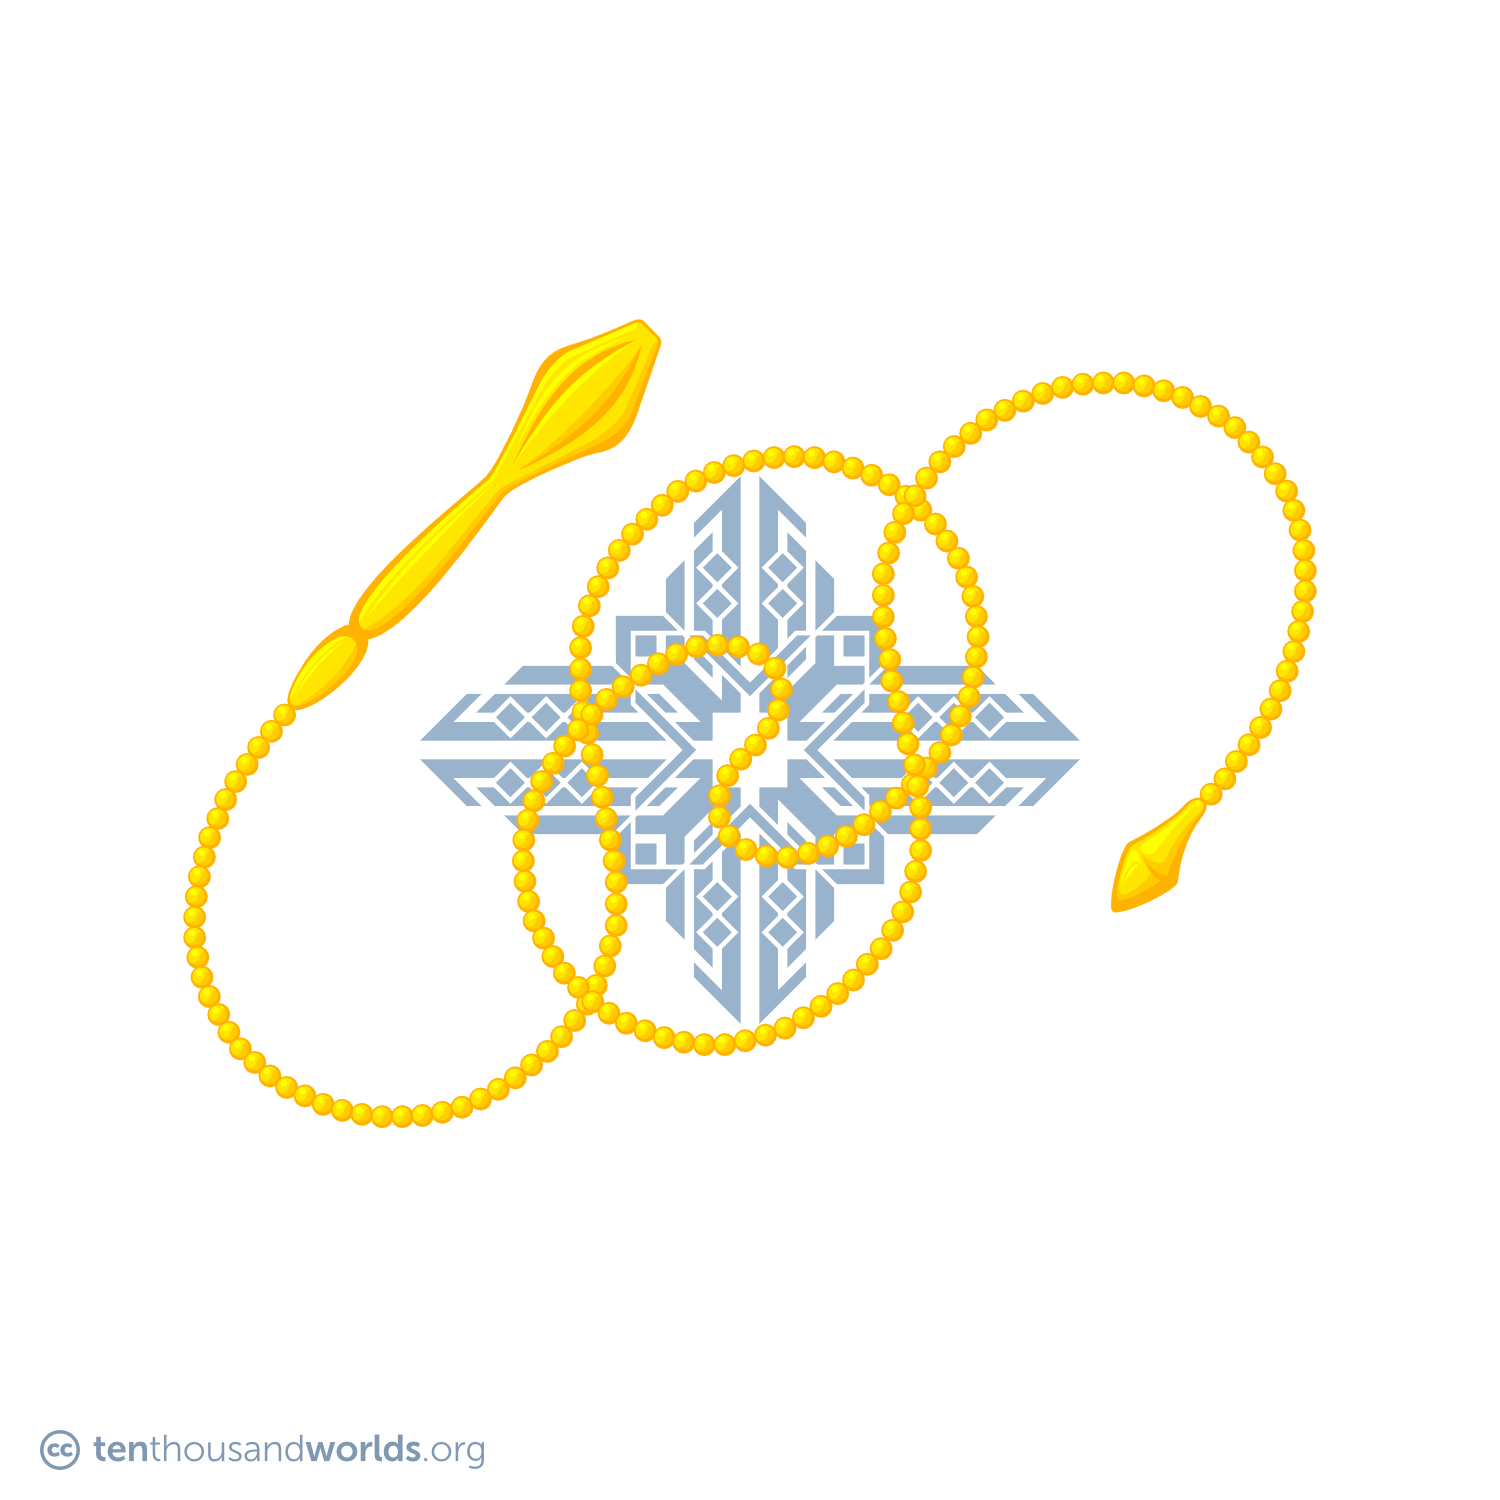 A golden club and a spindle attached by a long, looping chain, whirling over a light grey-blue geometric background.